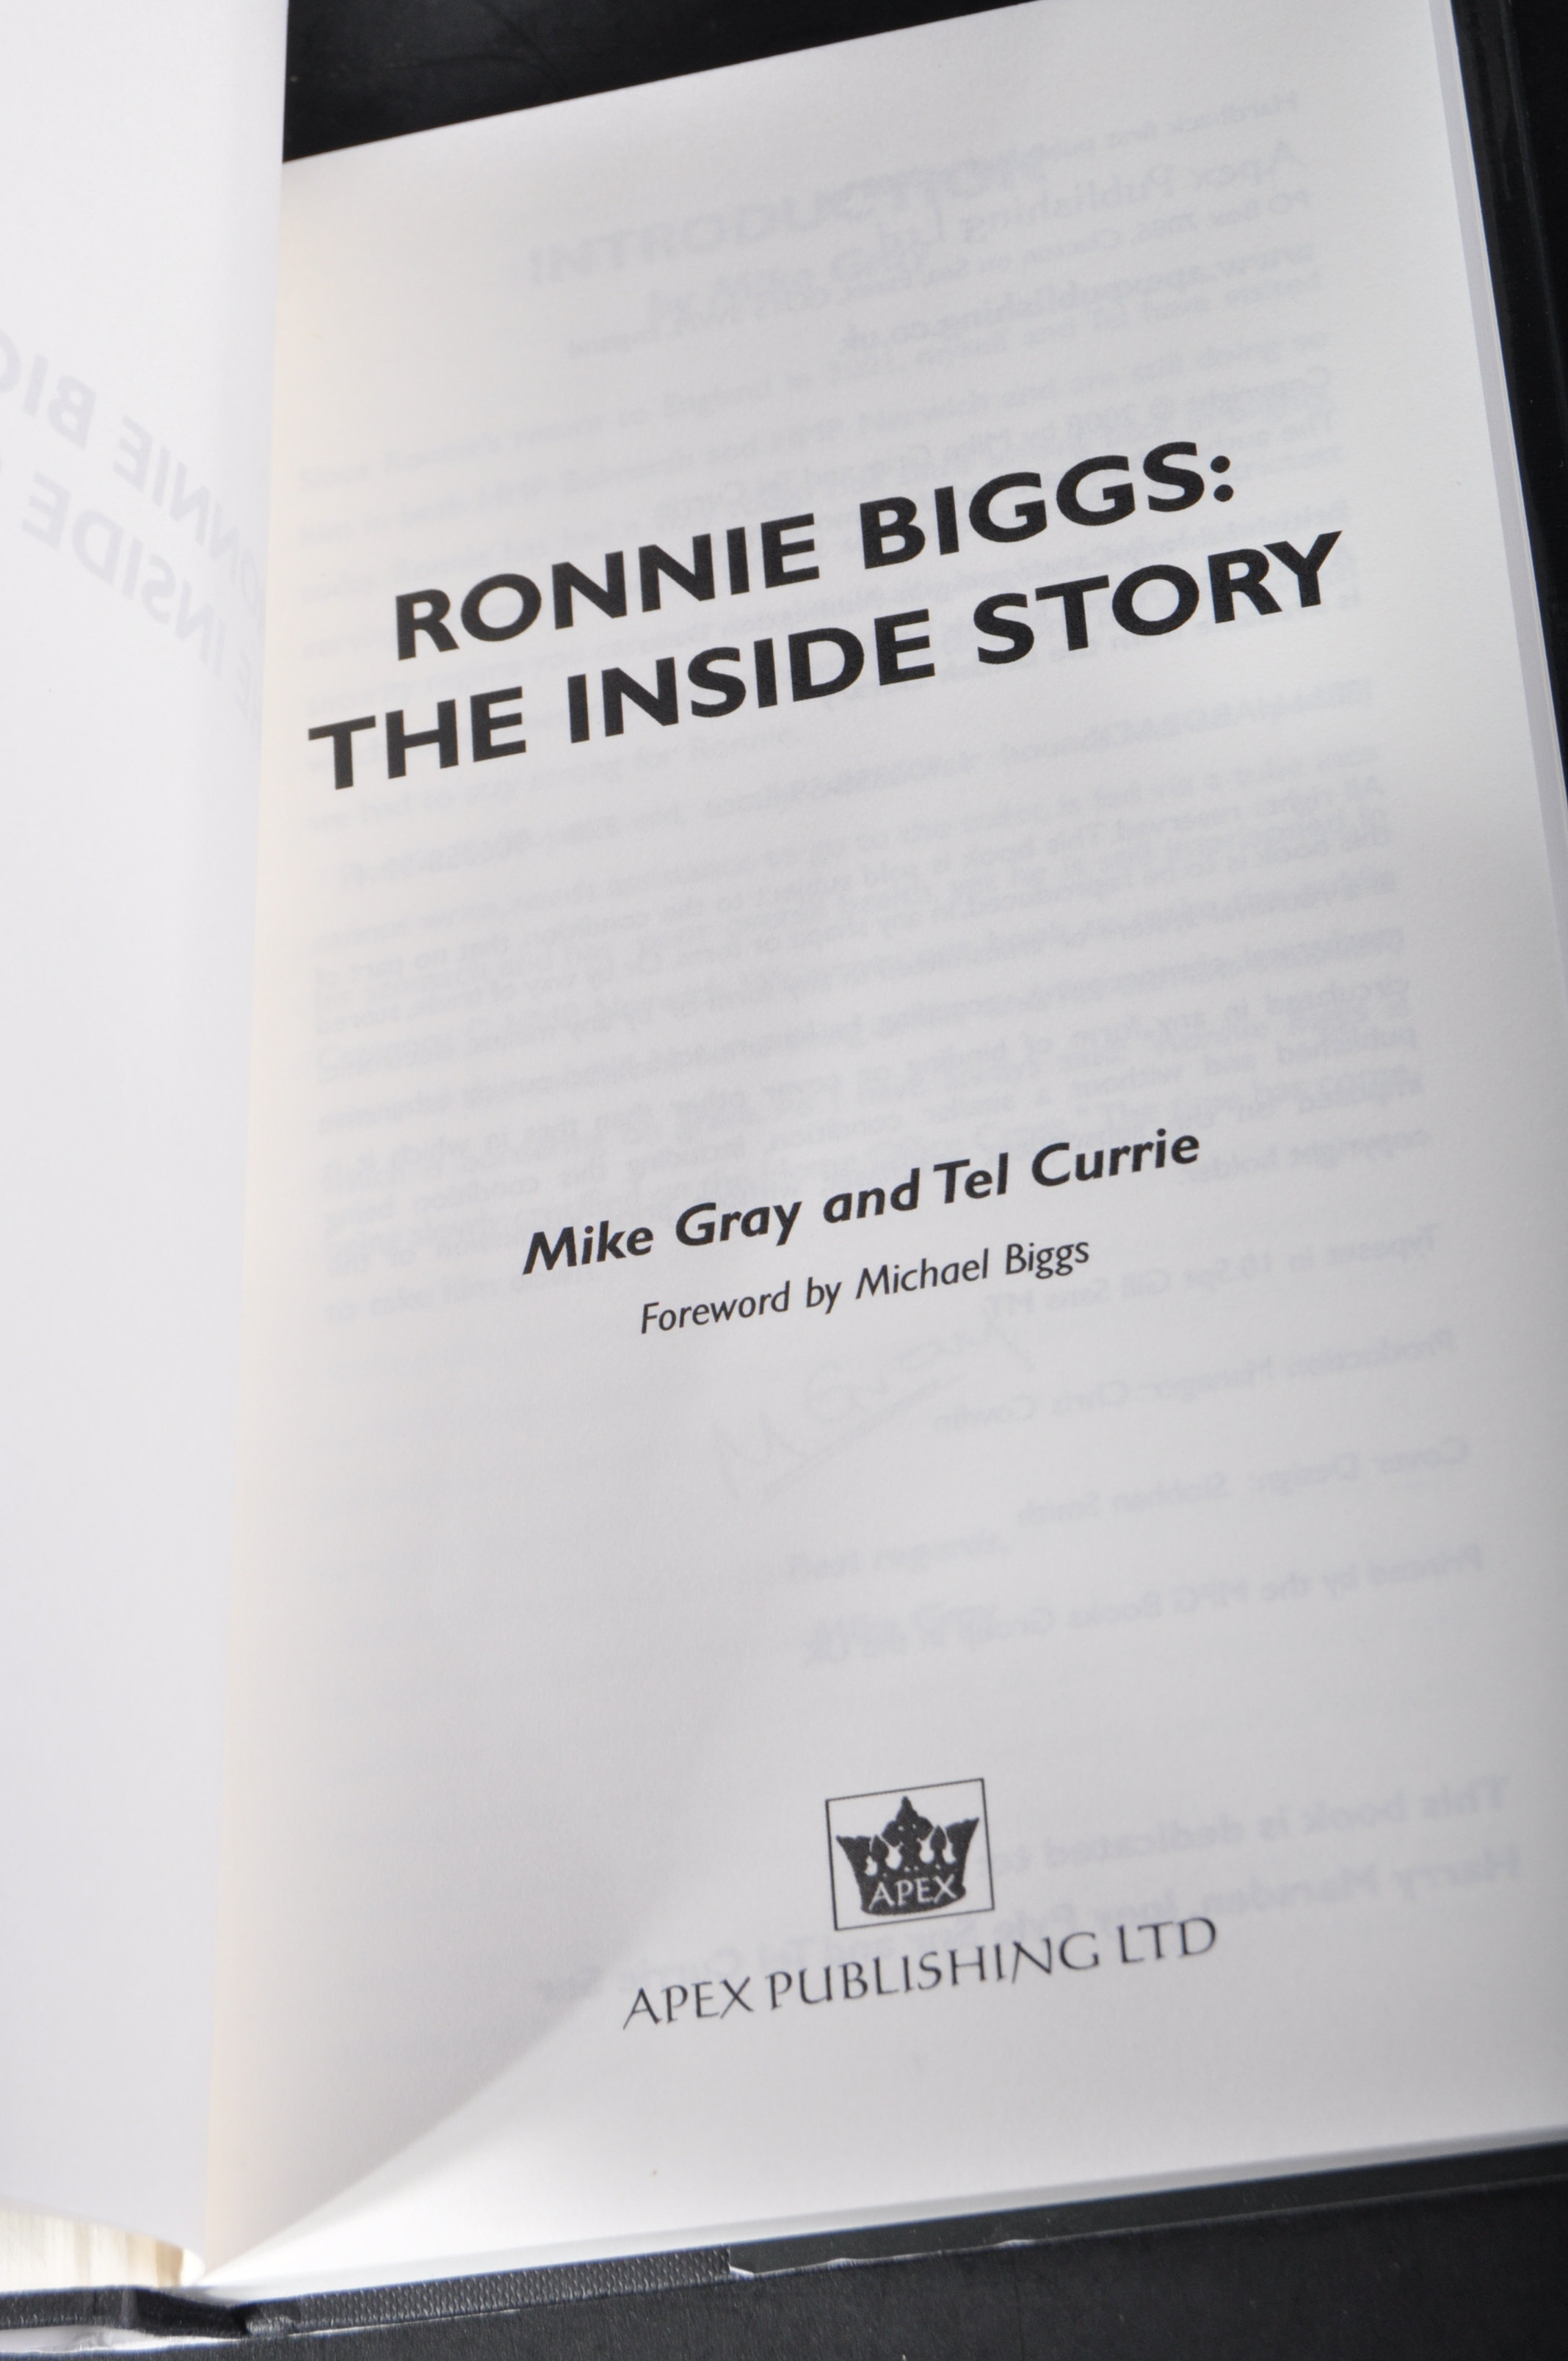 GREAT TRAIN ROBBERY - RONNIE BIGGS THE INSIDE STORY SIGNED - Image 5 of 7